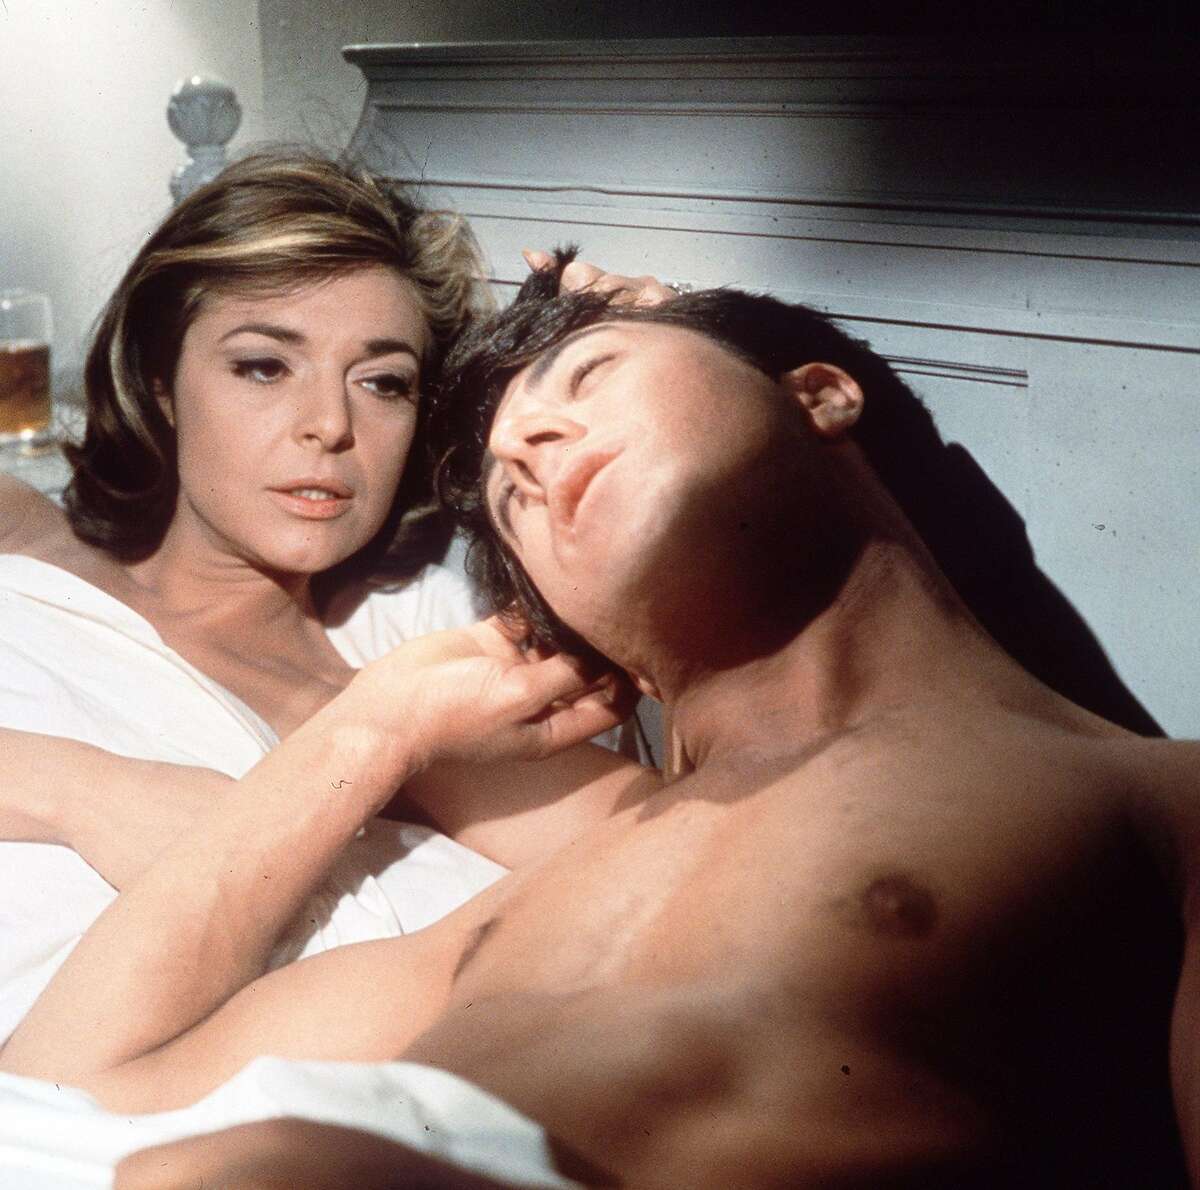 In this publicity still, actors Anne Bancroft, left, and Dustin Hoffman appear in a scene from the 1967 film "The Graduate." Bancroft, who won the 1962 best actress Oscar as the teacher of a young Helen Keller in "The Miracle Worker" but achieved greater fame as the seductive Mrs. Robinson in "The Graduate," died Tuesday June 7, 2005. She was 73. (AP Photo) Ran on: 09-11-2007 Mrs. Robinson (Anne Bancroft) and Benjamin Braddock (Dustin Hoffman) are lovers in The Graduate, the 1967 Mike Nichols film that still resonates with viewers.